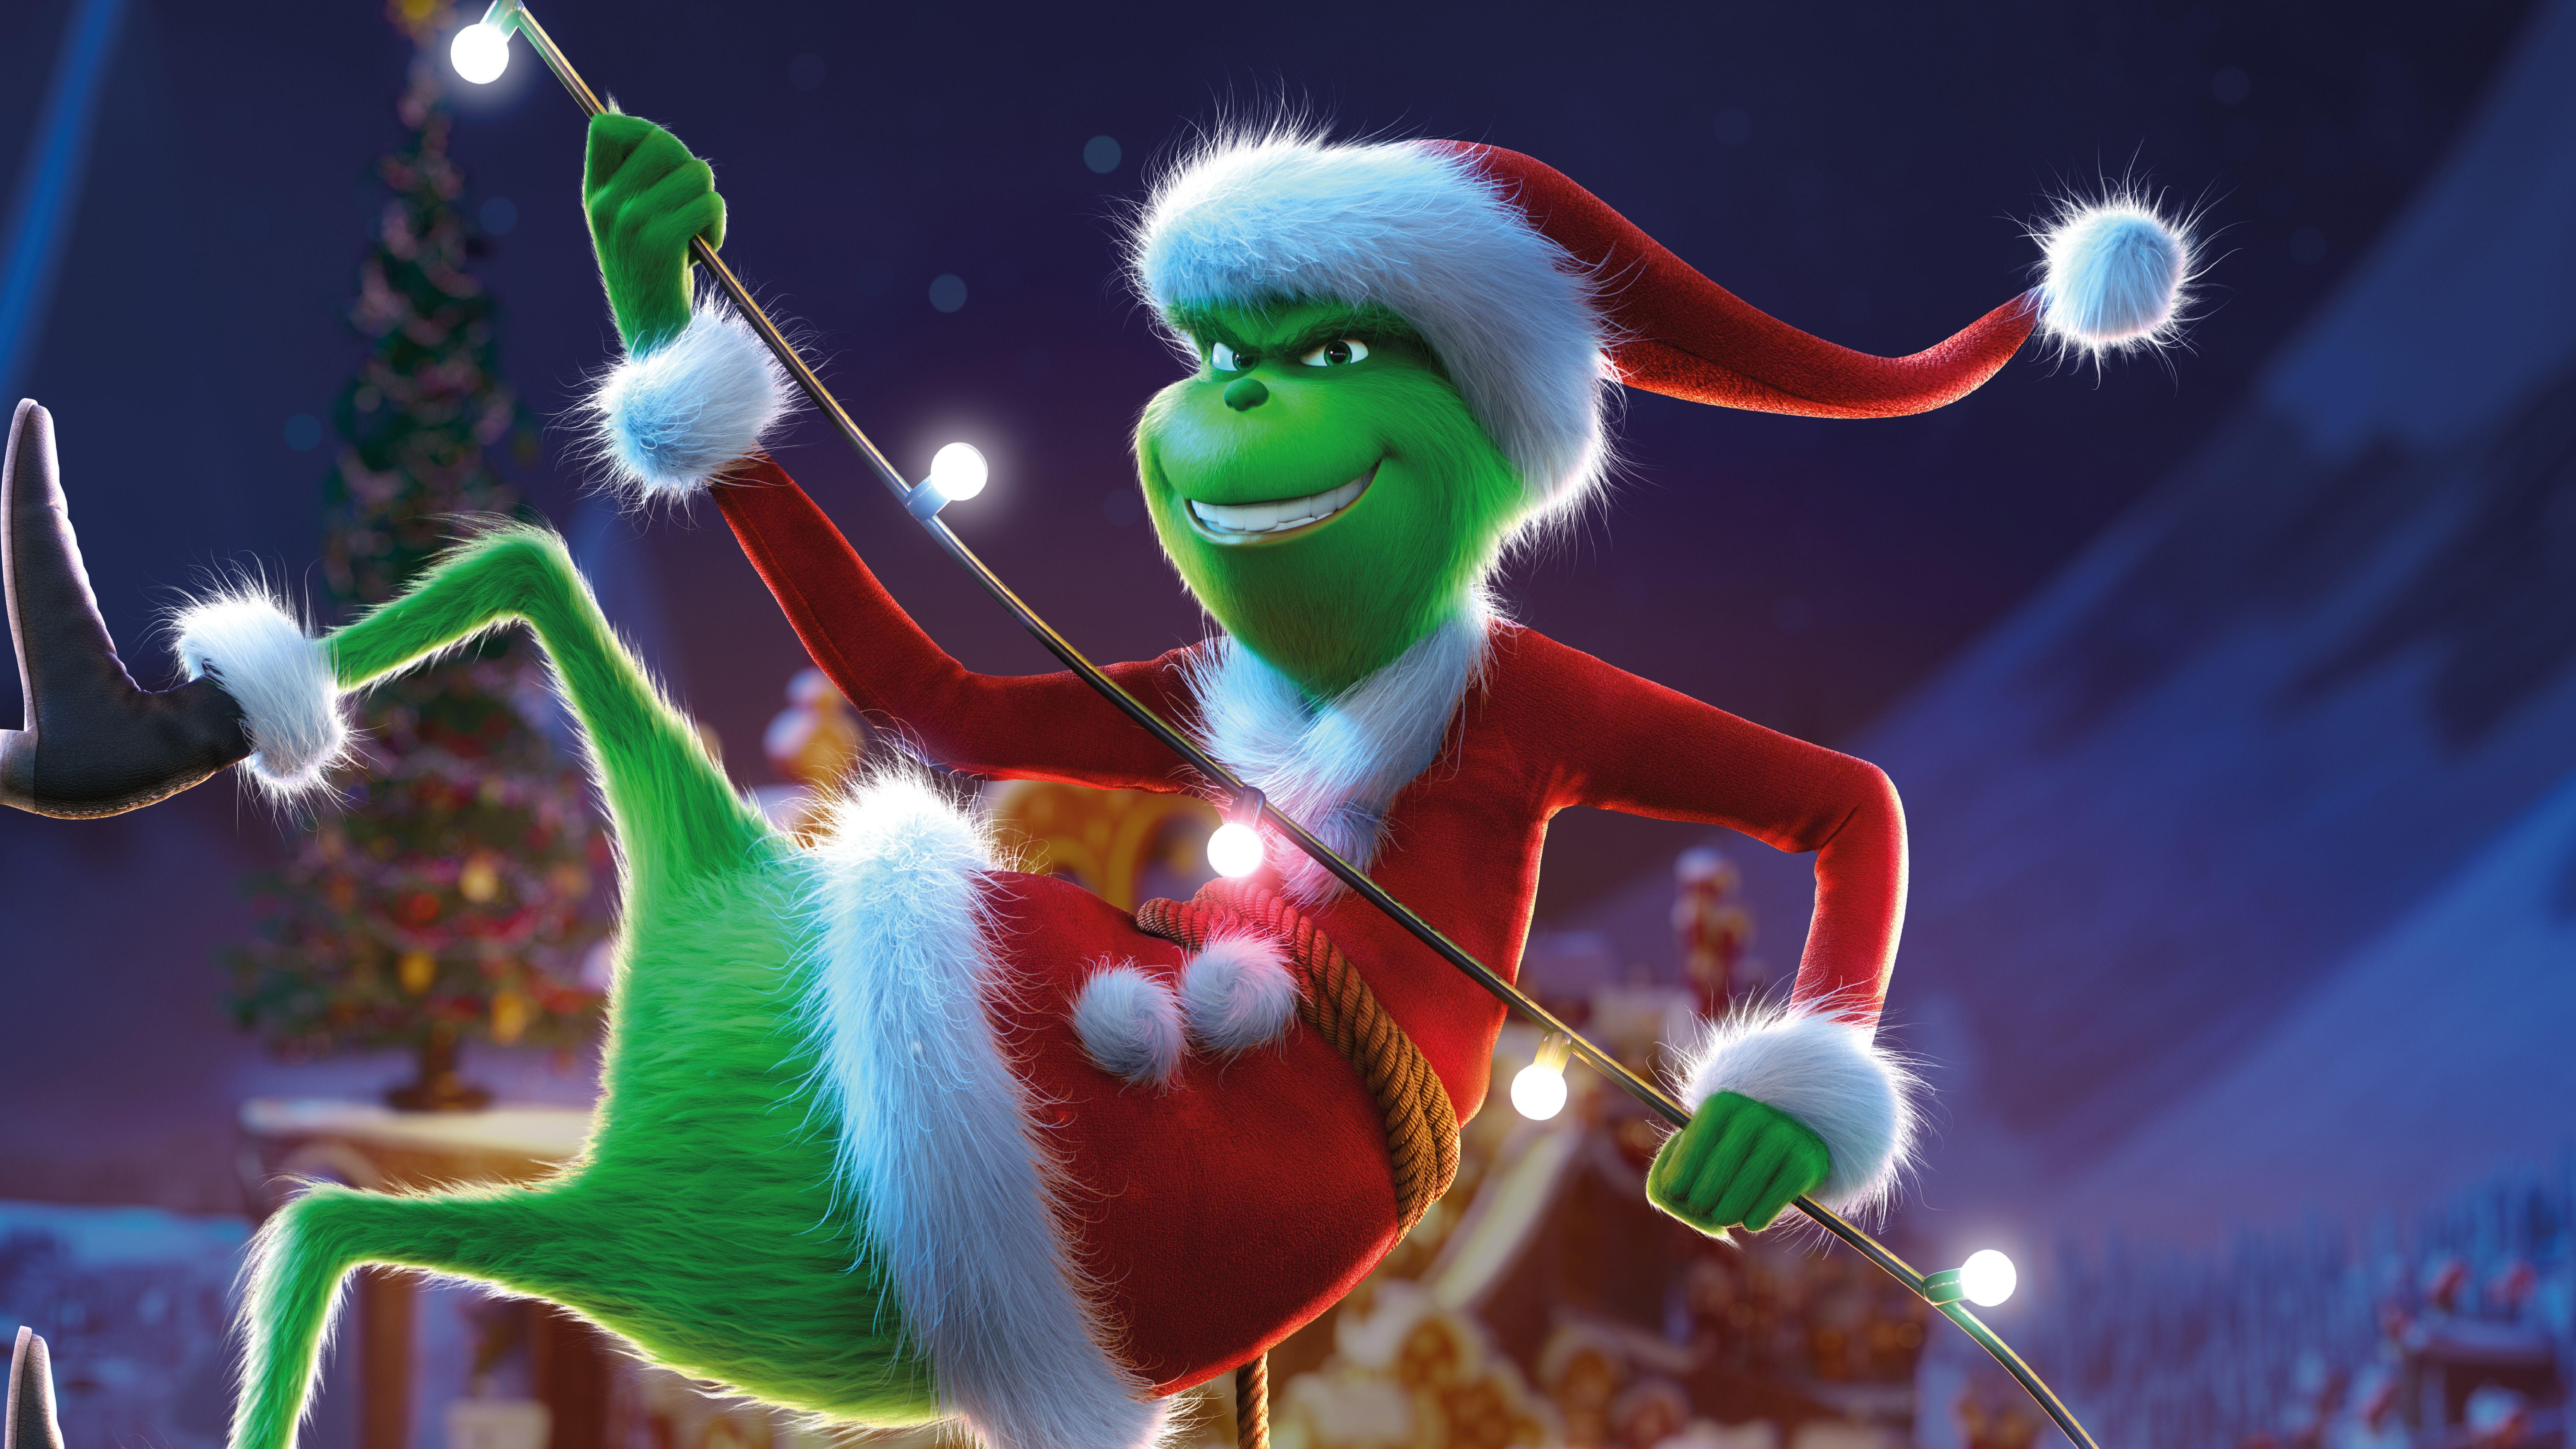 The Grinch 8k, HD Movies, 4k Wallpaper, Image, Background, Photo